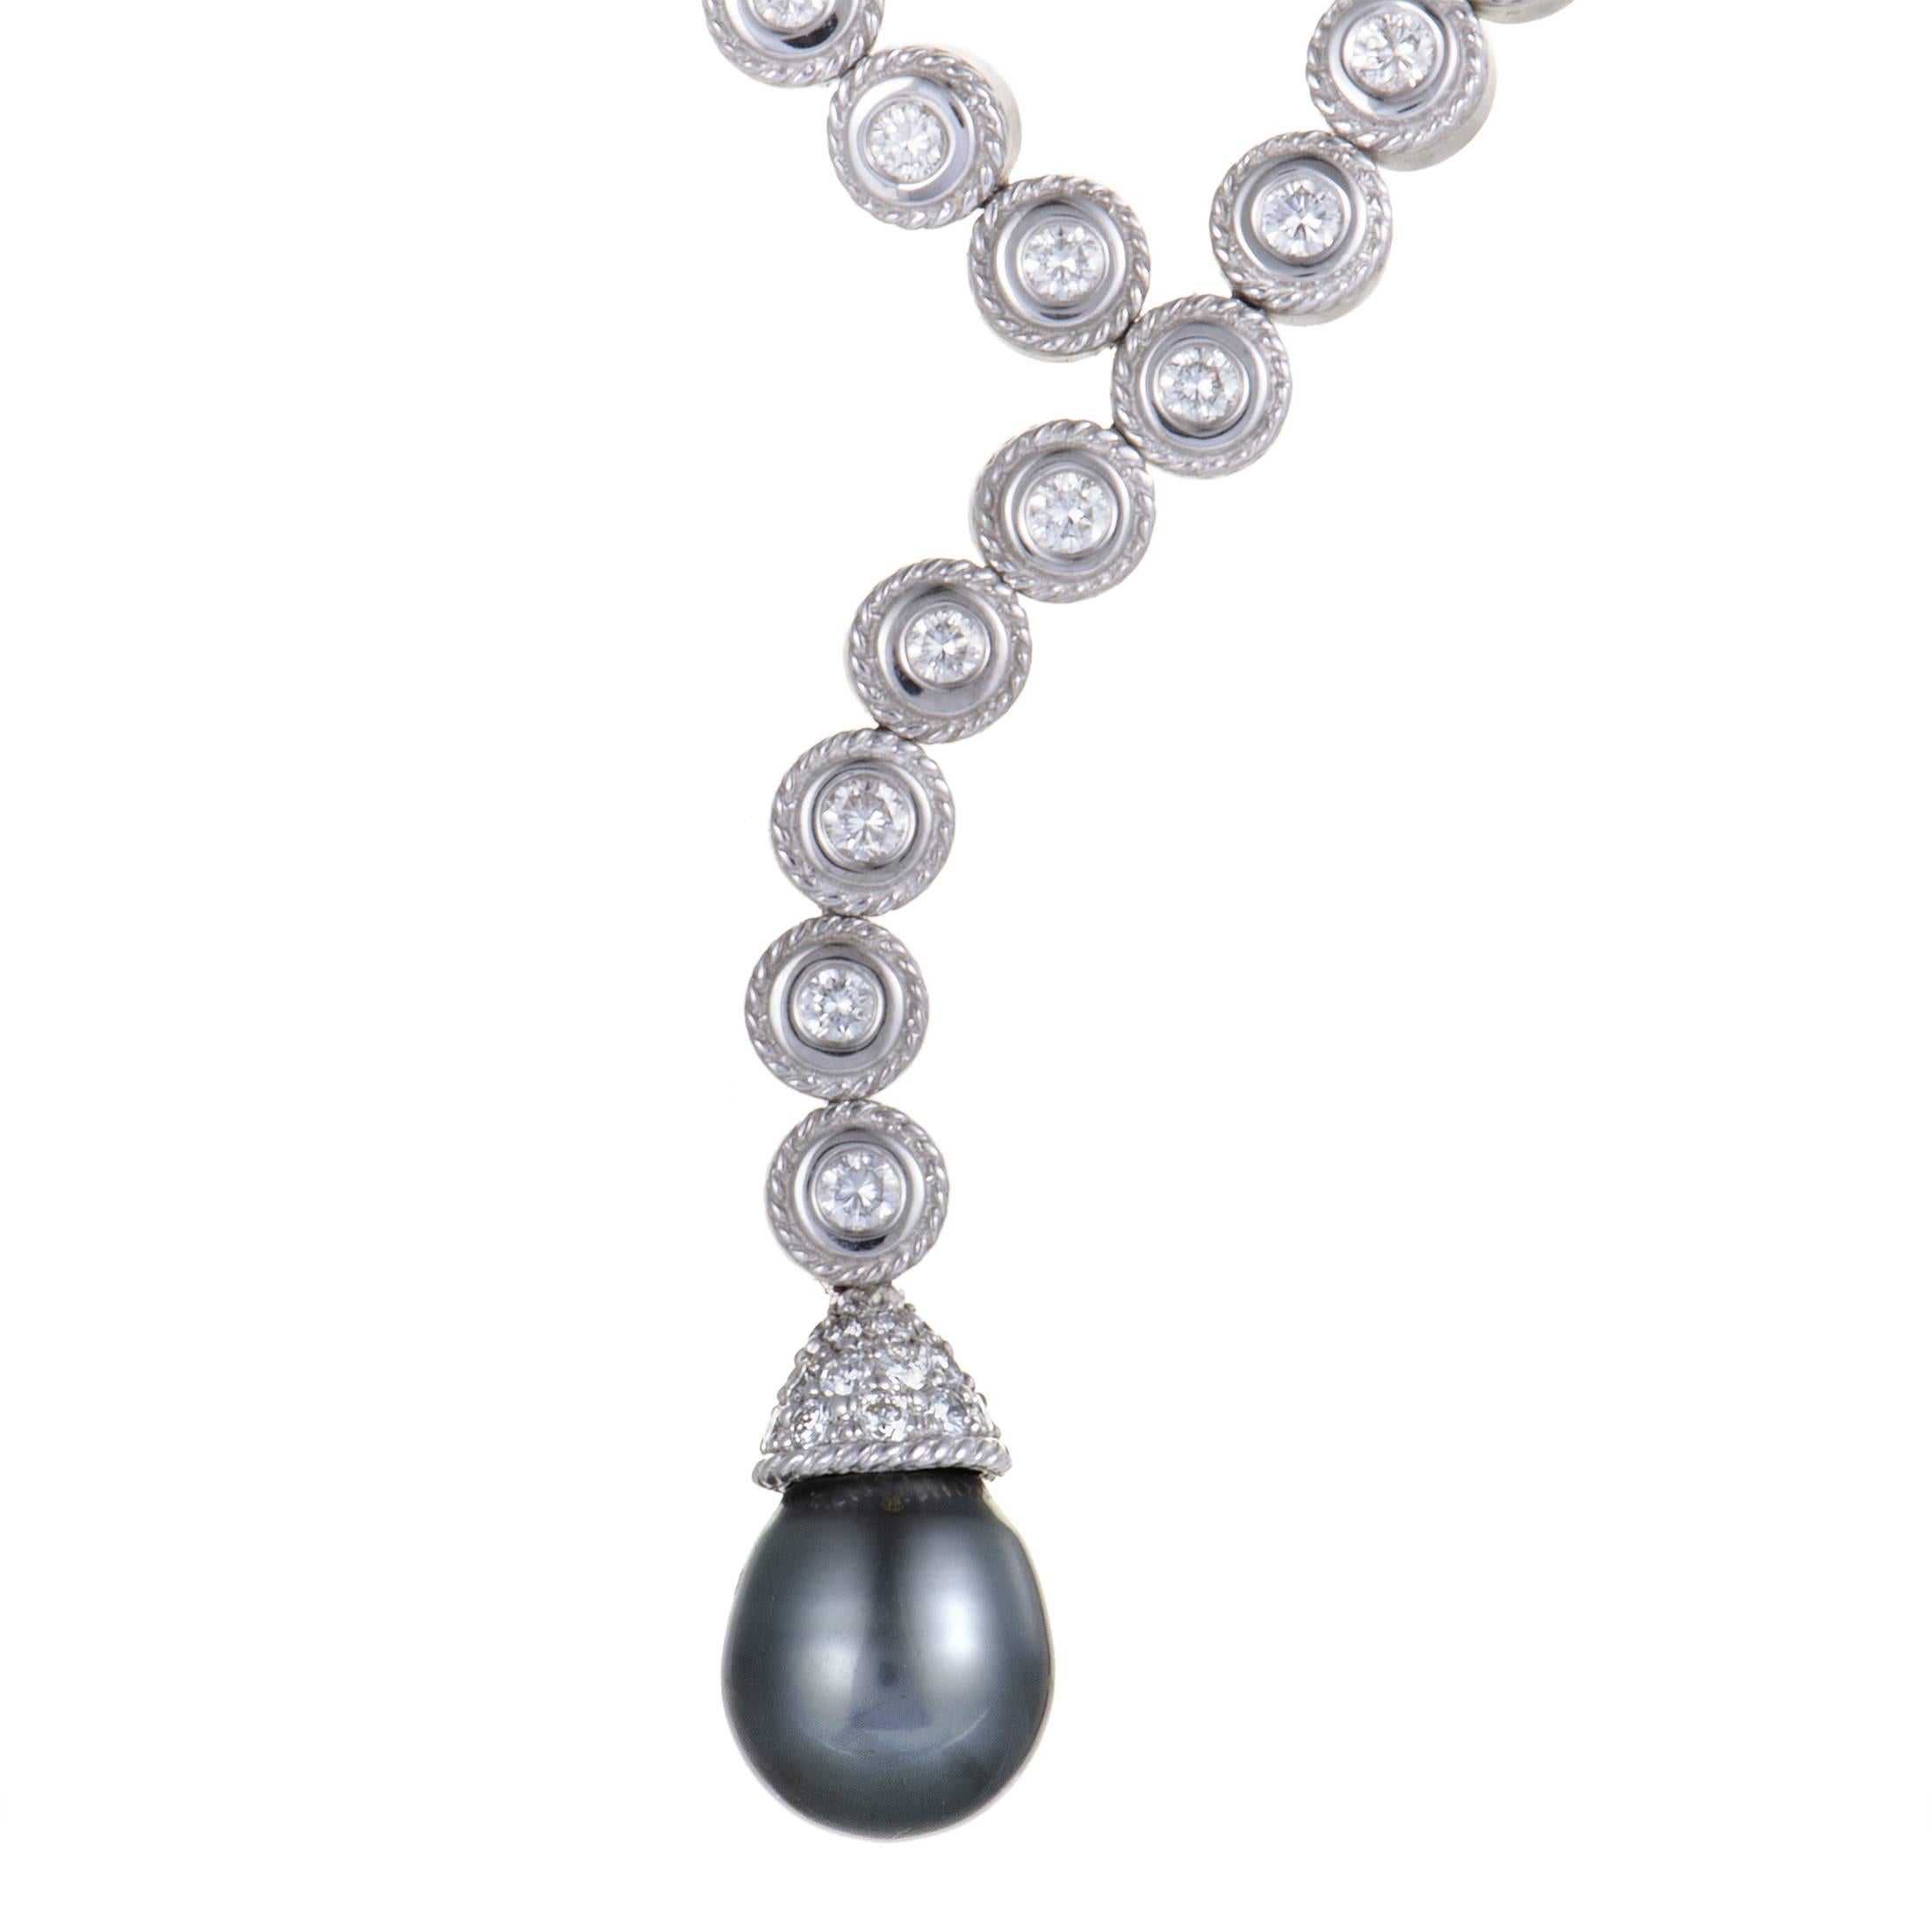 Offering a look of utmost class and prestige, this sublime Penny Preville necklace will gorgeously accentuate any attire. The necklace is made of elegant 18K white gold and set with 2.50 carats of scintillating diamonds, also boasting a stunning